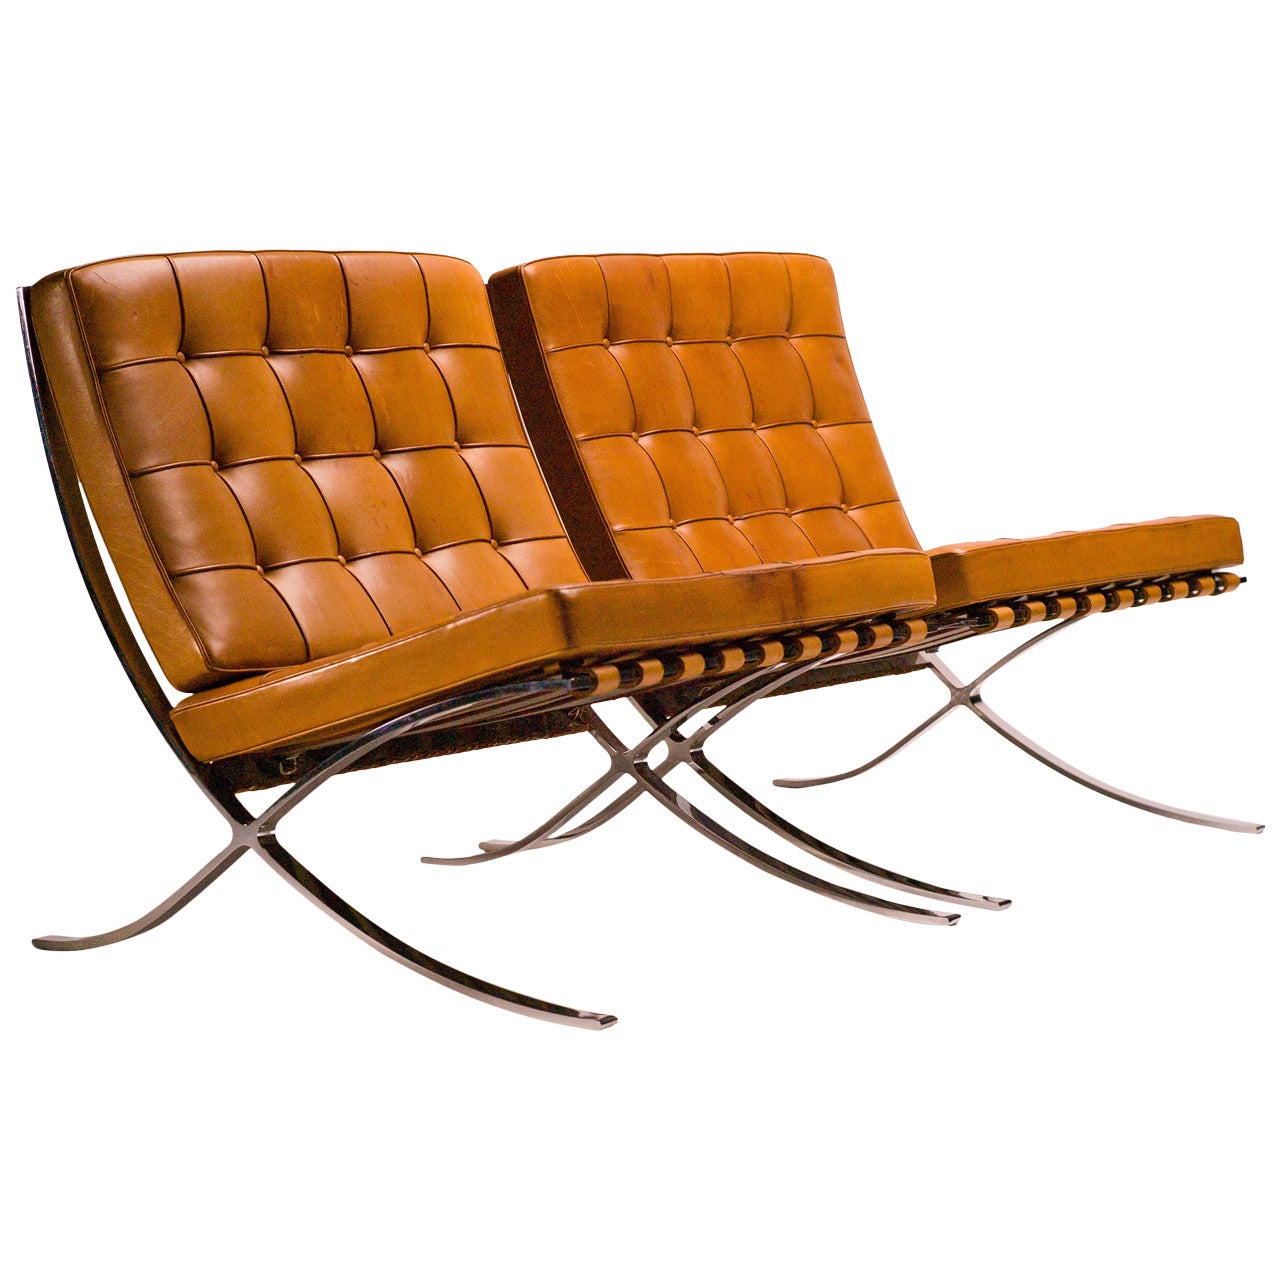 Barcelona Chairs in Saddle leather by Mies van der Rohe for Knoll International